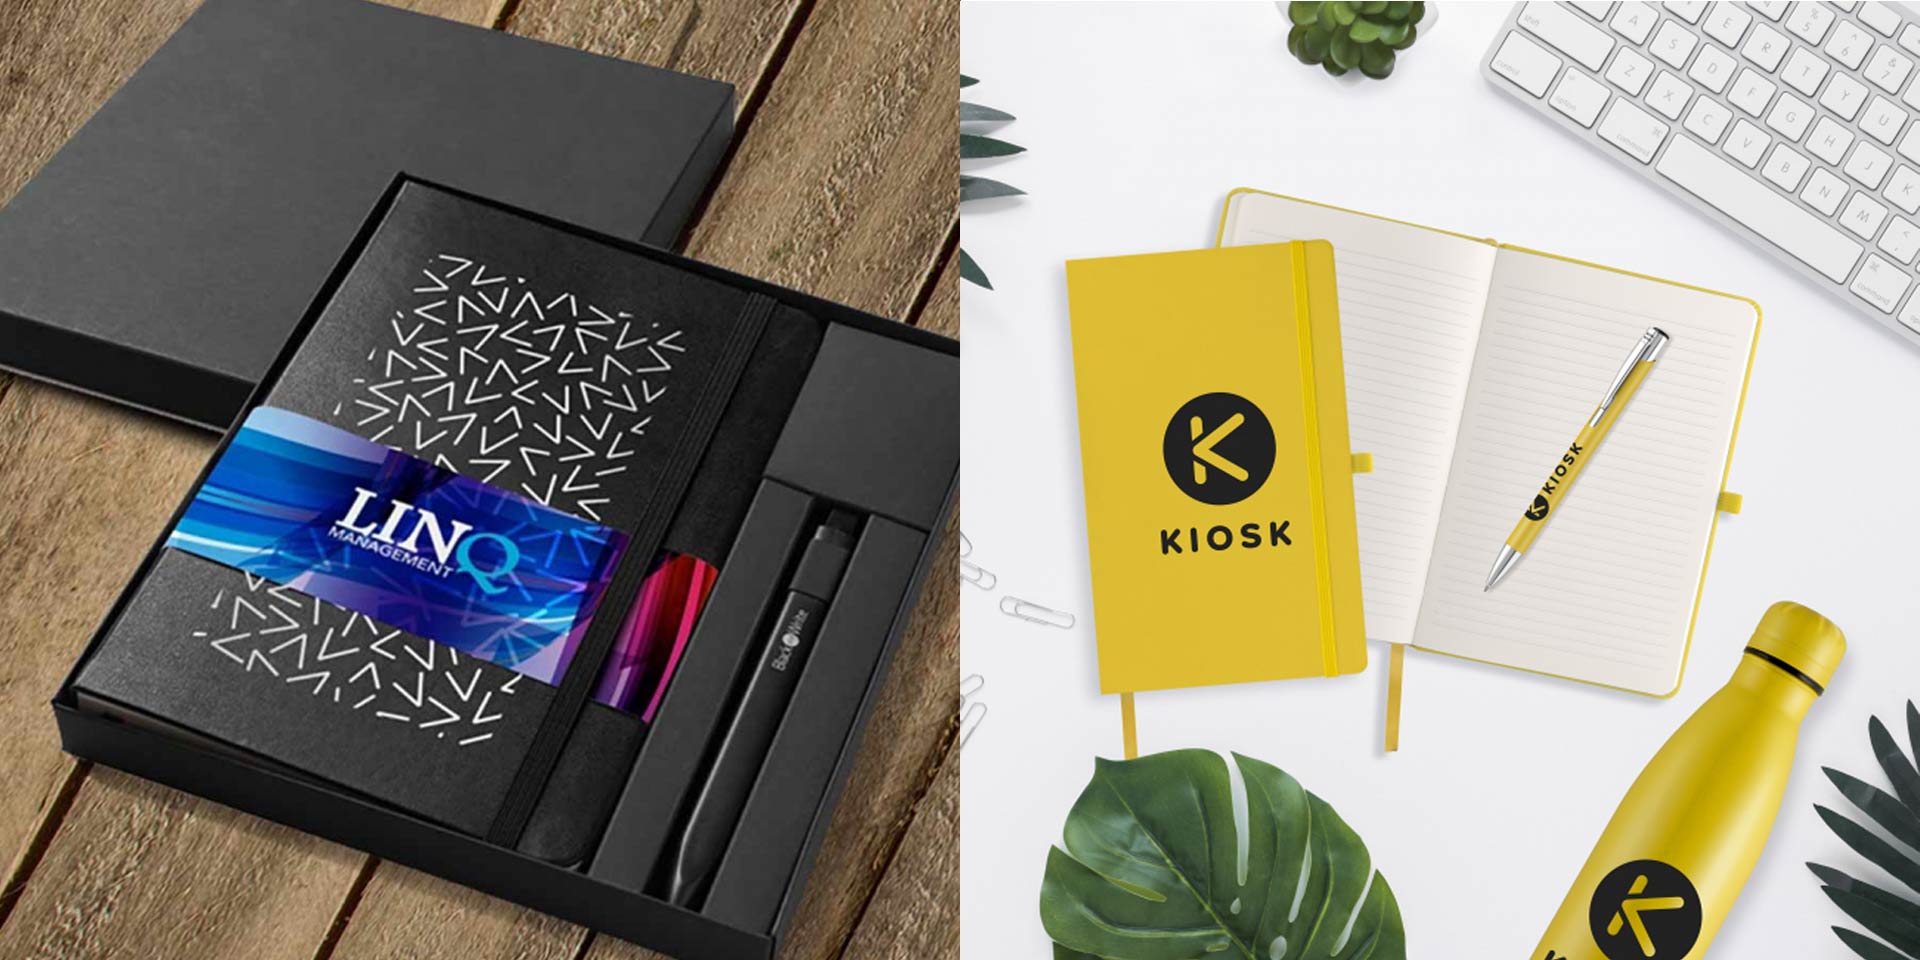 5 things to know about choosing promotional gifts that mean something to your customer